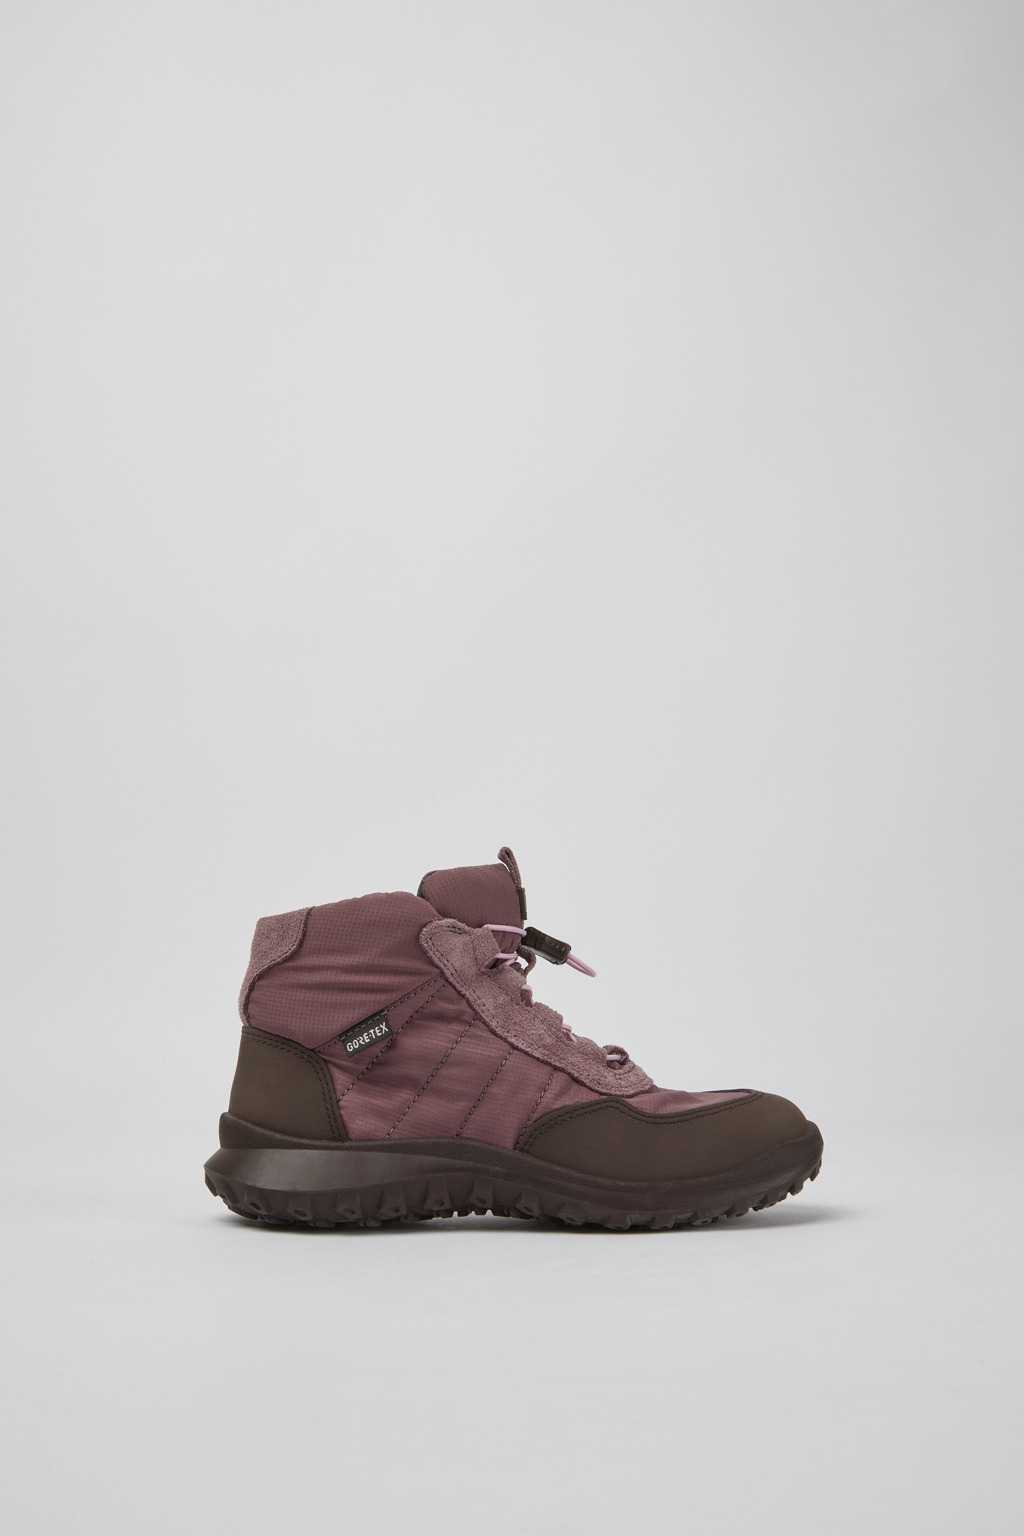 CRCLR Purple Boots for Kids - Fall/Winter collection - Camper USA